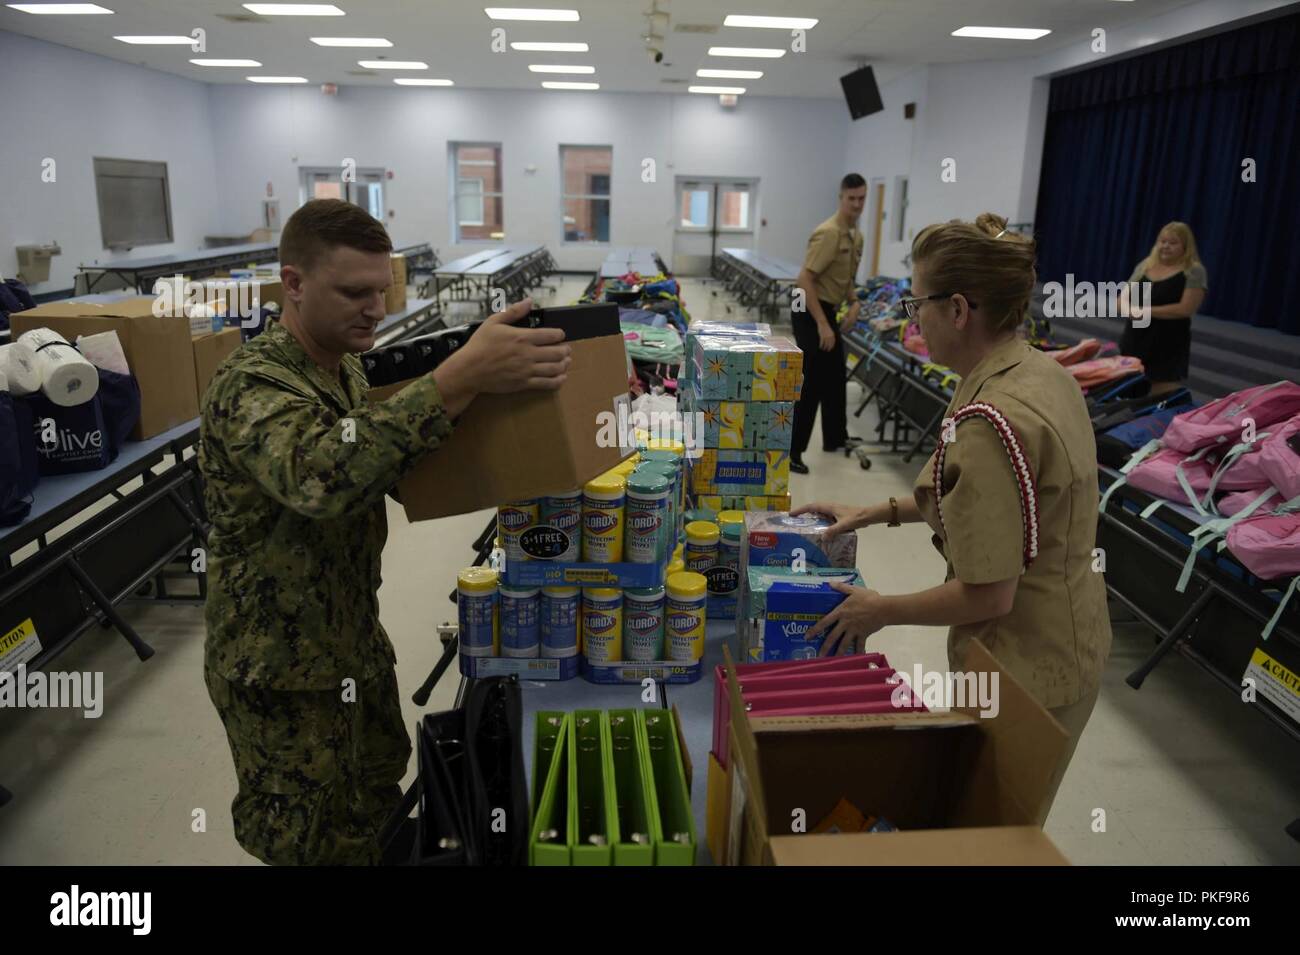 Fla. (Aug. 10, 2018) Sailors from the Center for Information Warfare Training (CIWT) and Information Warfare Training Command (IWTC) Corry Station drop off school supplies collected during a school supply drive for Navy Point Elementary School. The drive was organized by IWTC Corry Station’s First Class Petty Officer Association and collected more than $5,000 in donations from CIWT, IWTC Corry Station and local businesses and veterans associations. Stock Photo